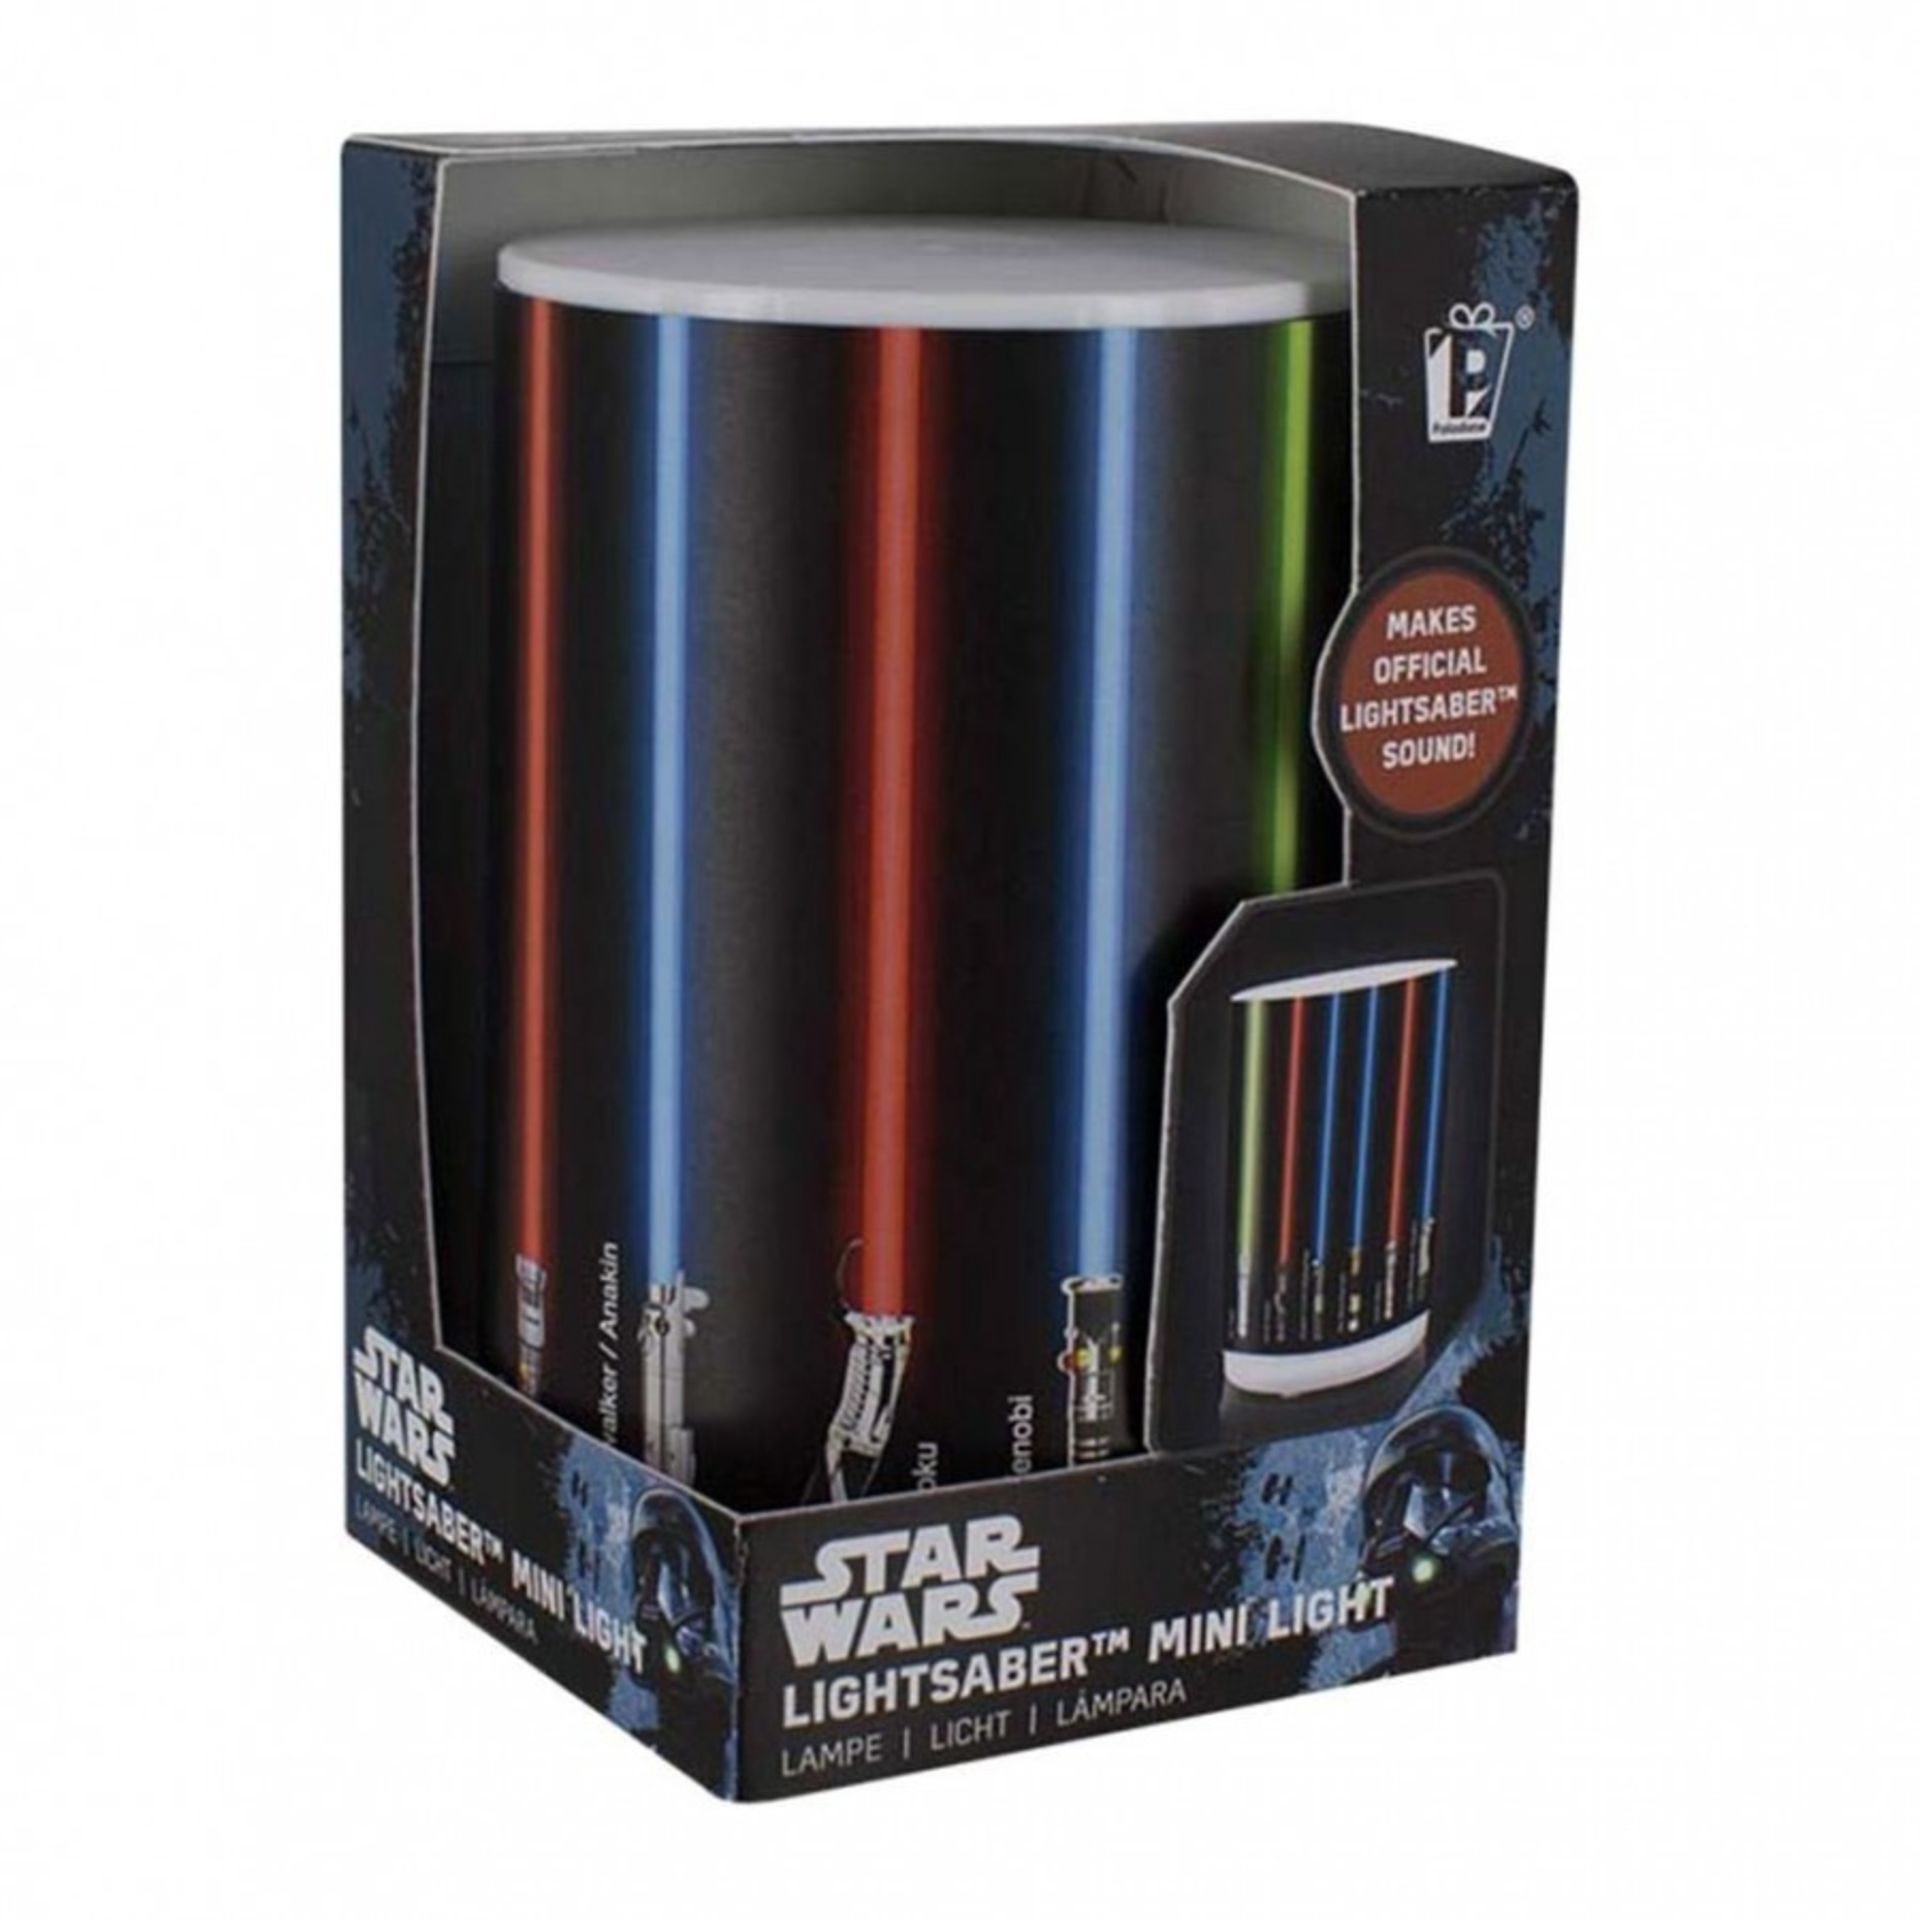 25pcs Brand new Star Wars Night Light with Light Saber Sound effects - - official StarWars